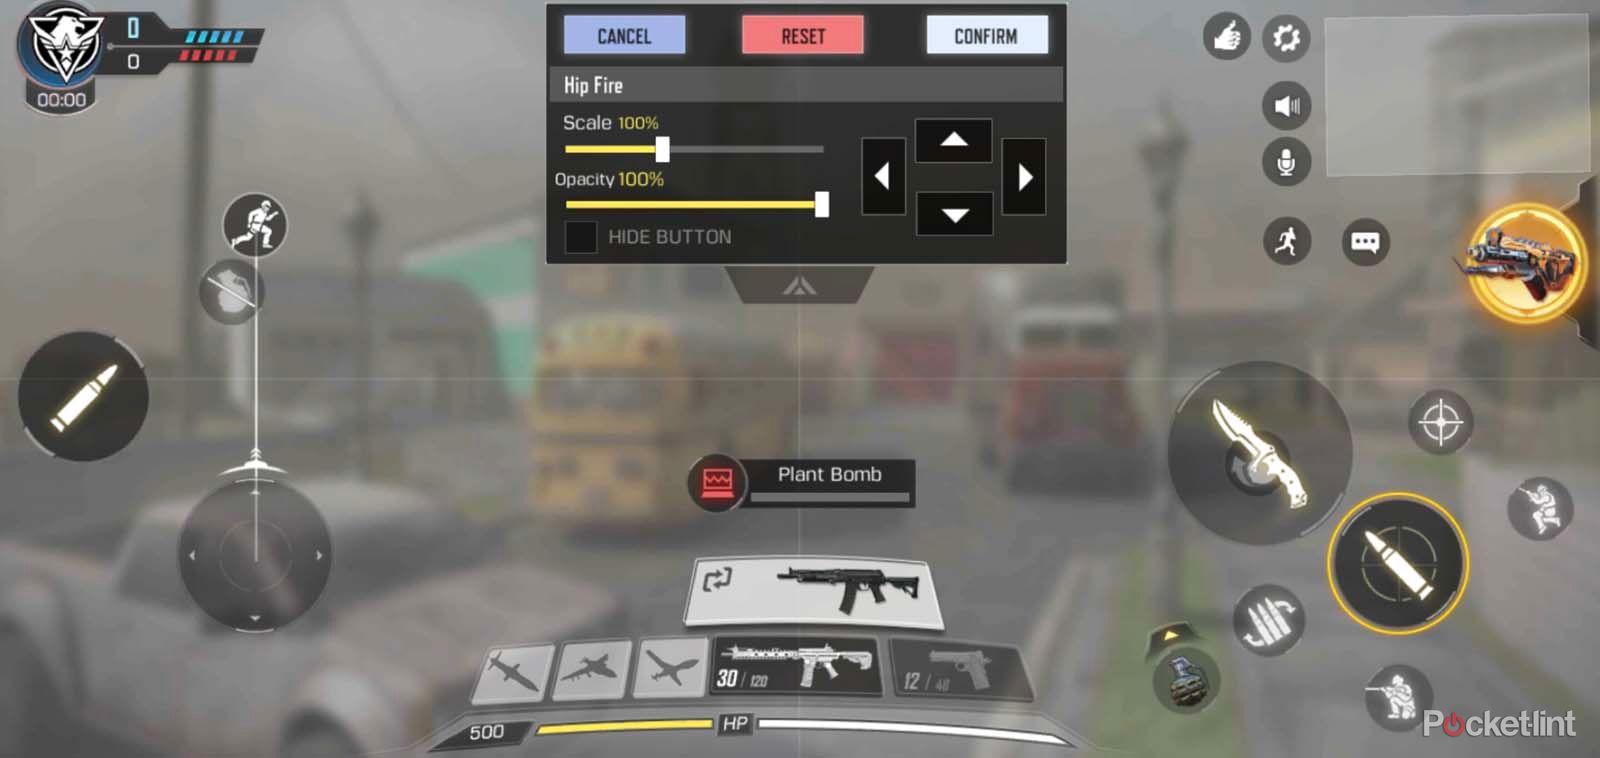 Call of duty mobile screens image 1